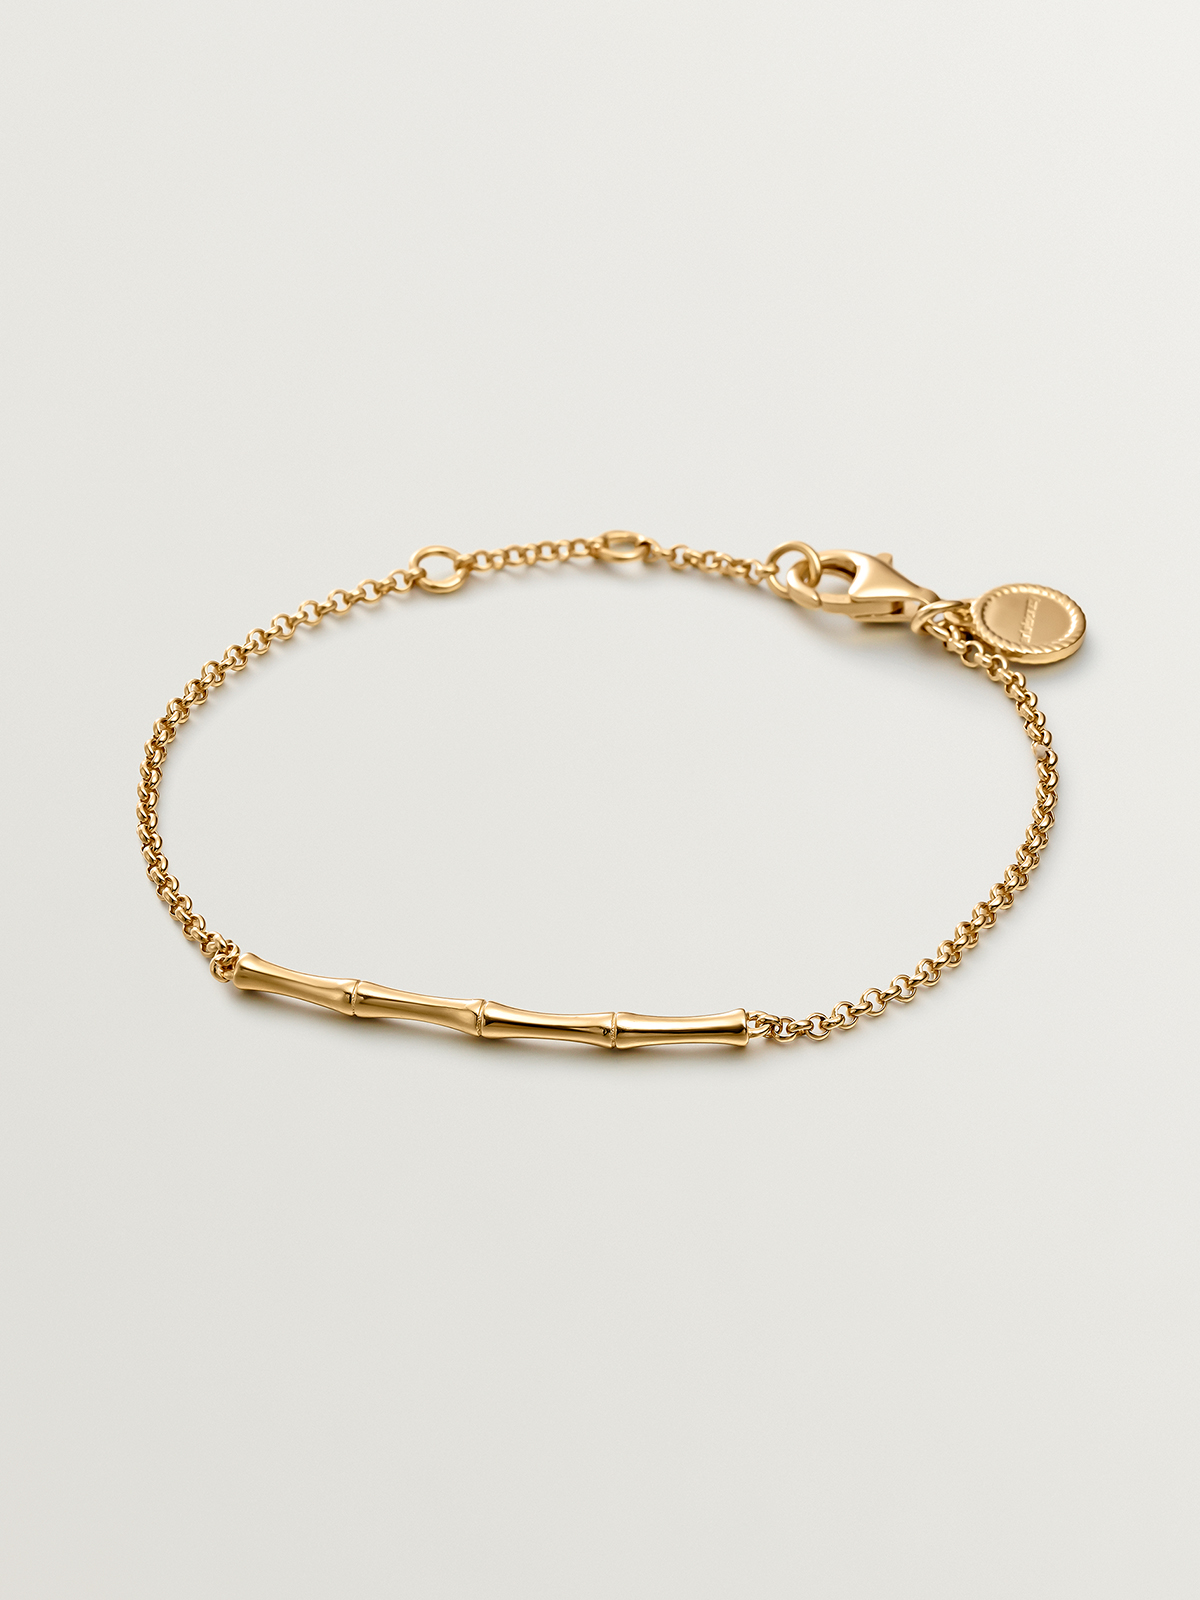 925 silver bracelet bathed in 18K yellow gold with bamboo cane